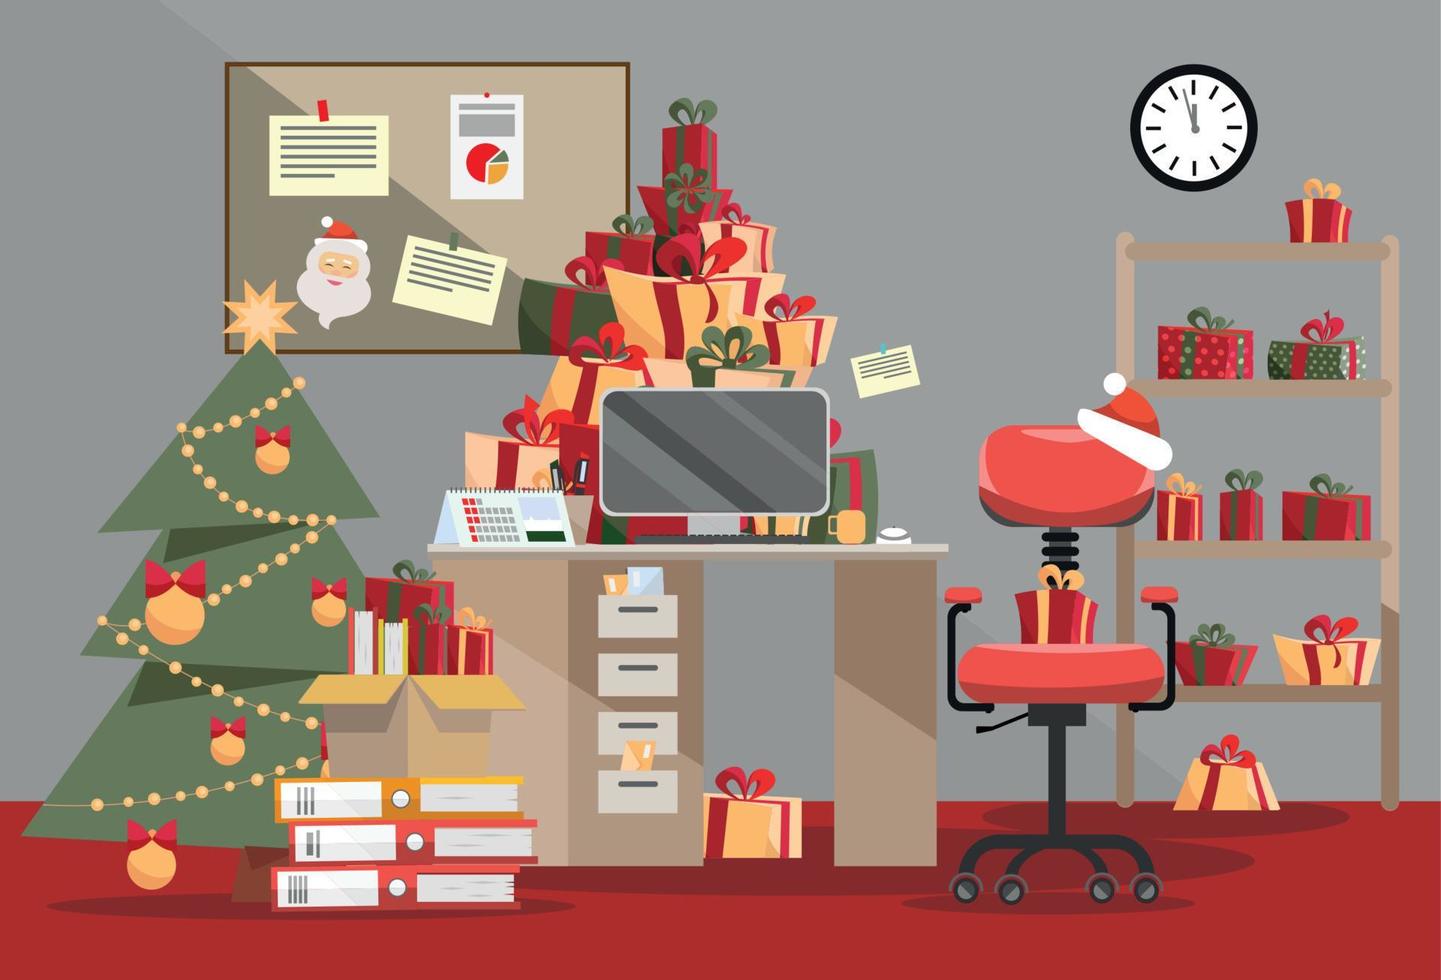 Santa Claus office with mountain of gifts. Piles of present boxes with ribbons and Stack of documents lie on table, floor, shelf. Interior of room is decorated with Christmas tree. Flat cartoon vector